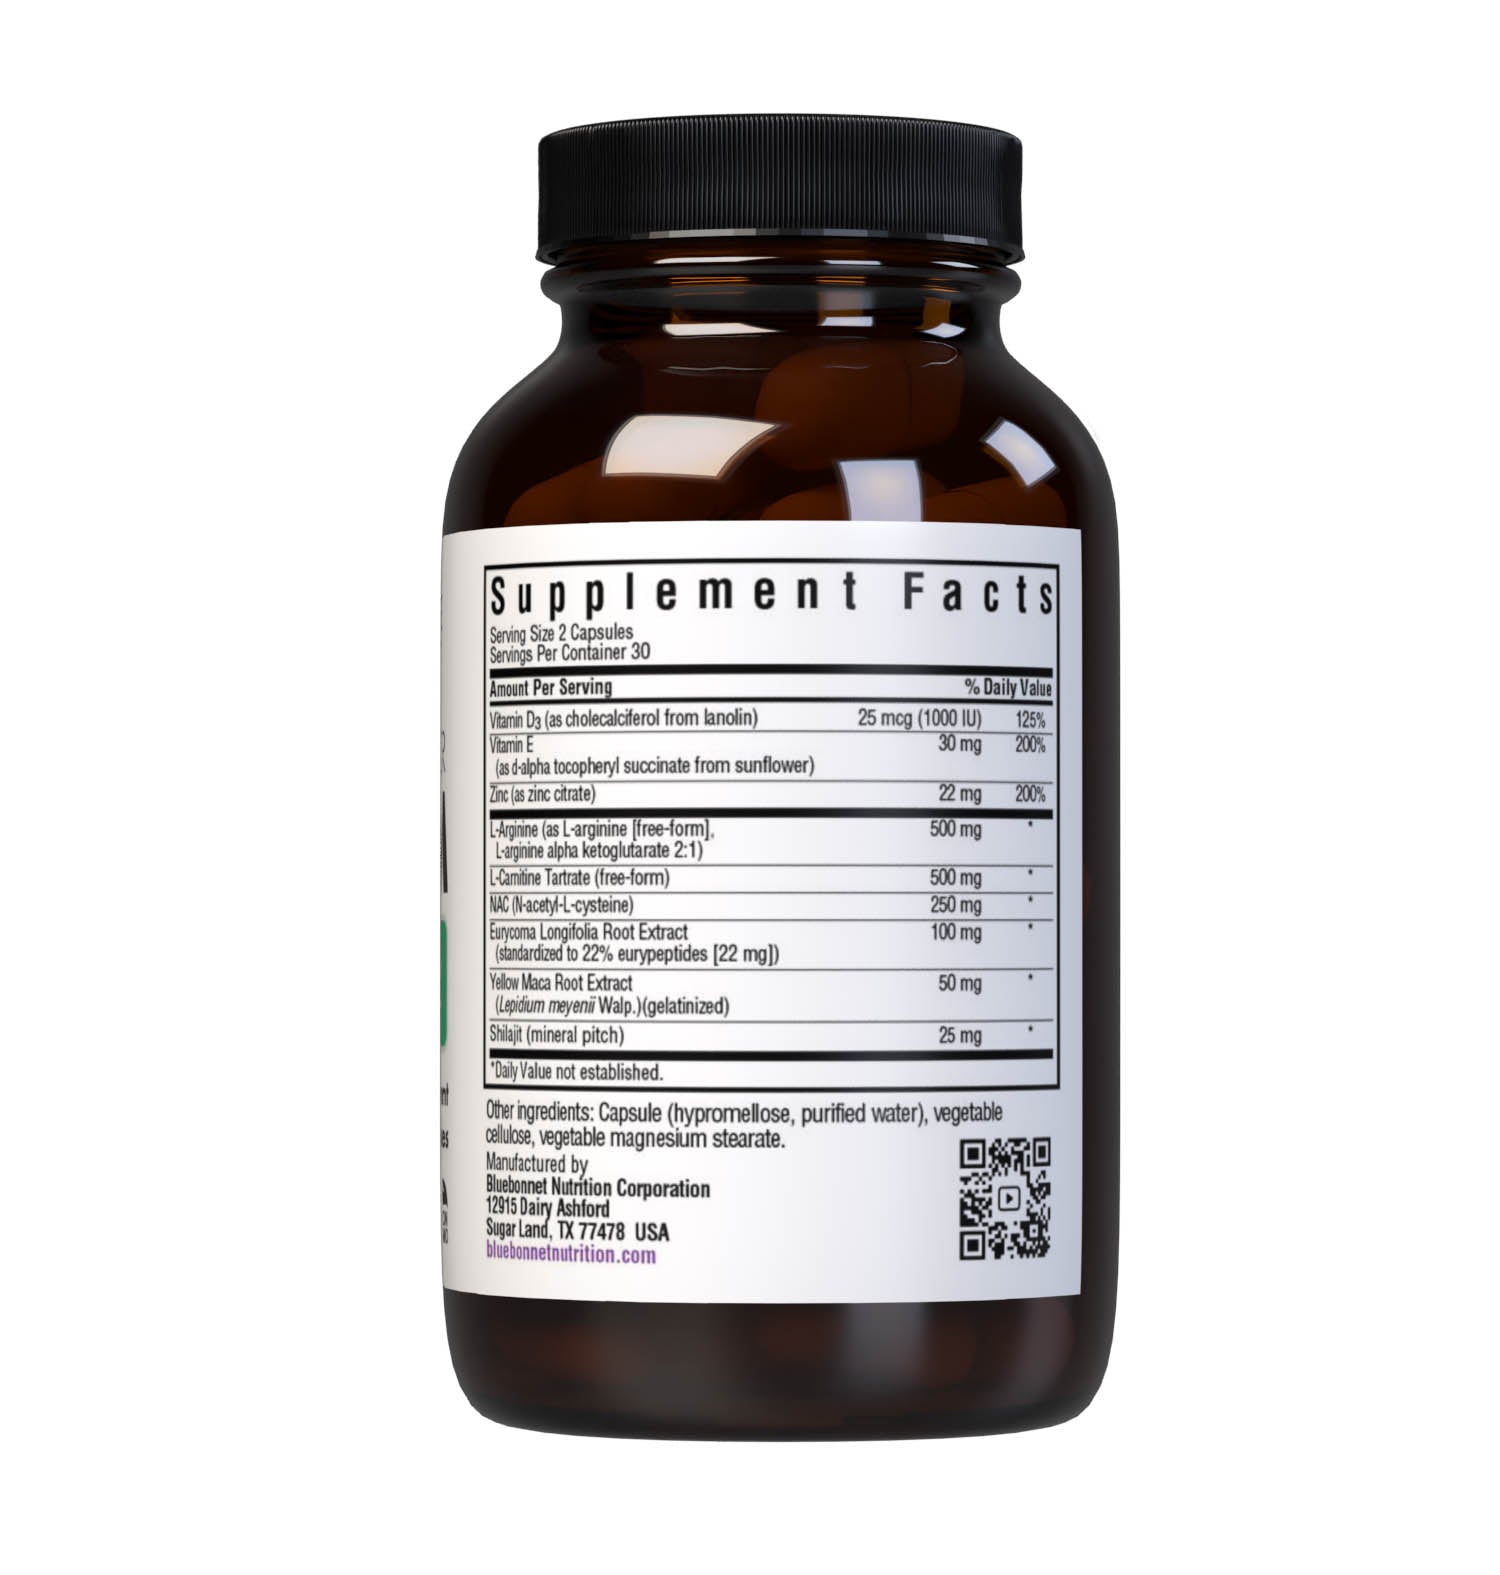 INTIMATE ESSENTIALS CONCEPTION FORMULA FOR HIM 60 vegetable capsules May Support Testosterone levels & Healthy Sperm. Supplement facts panel. #size_60 count